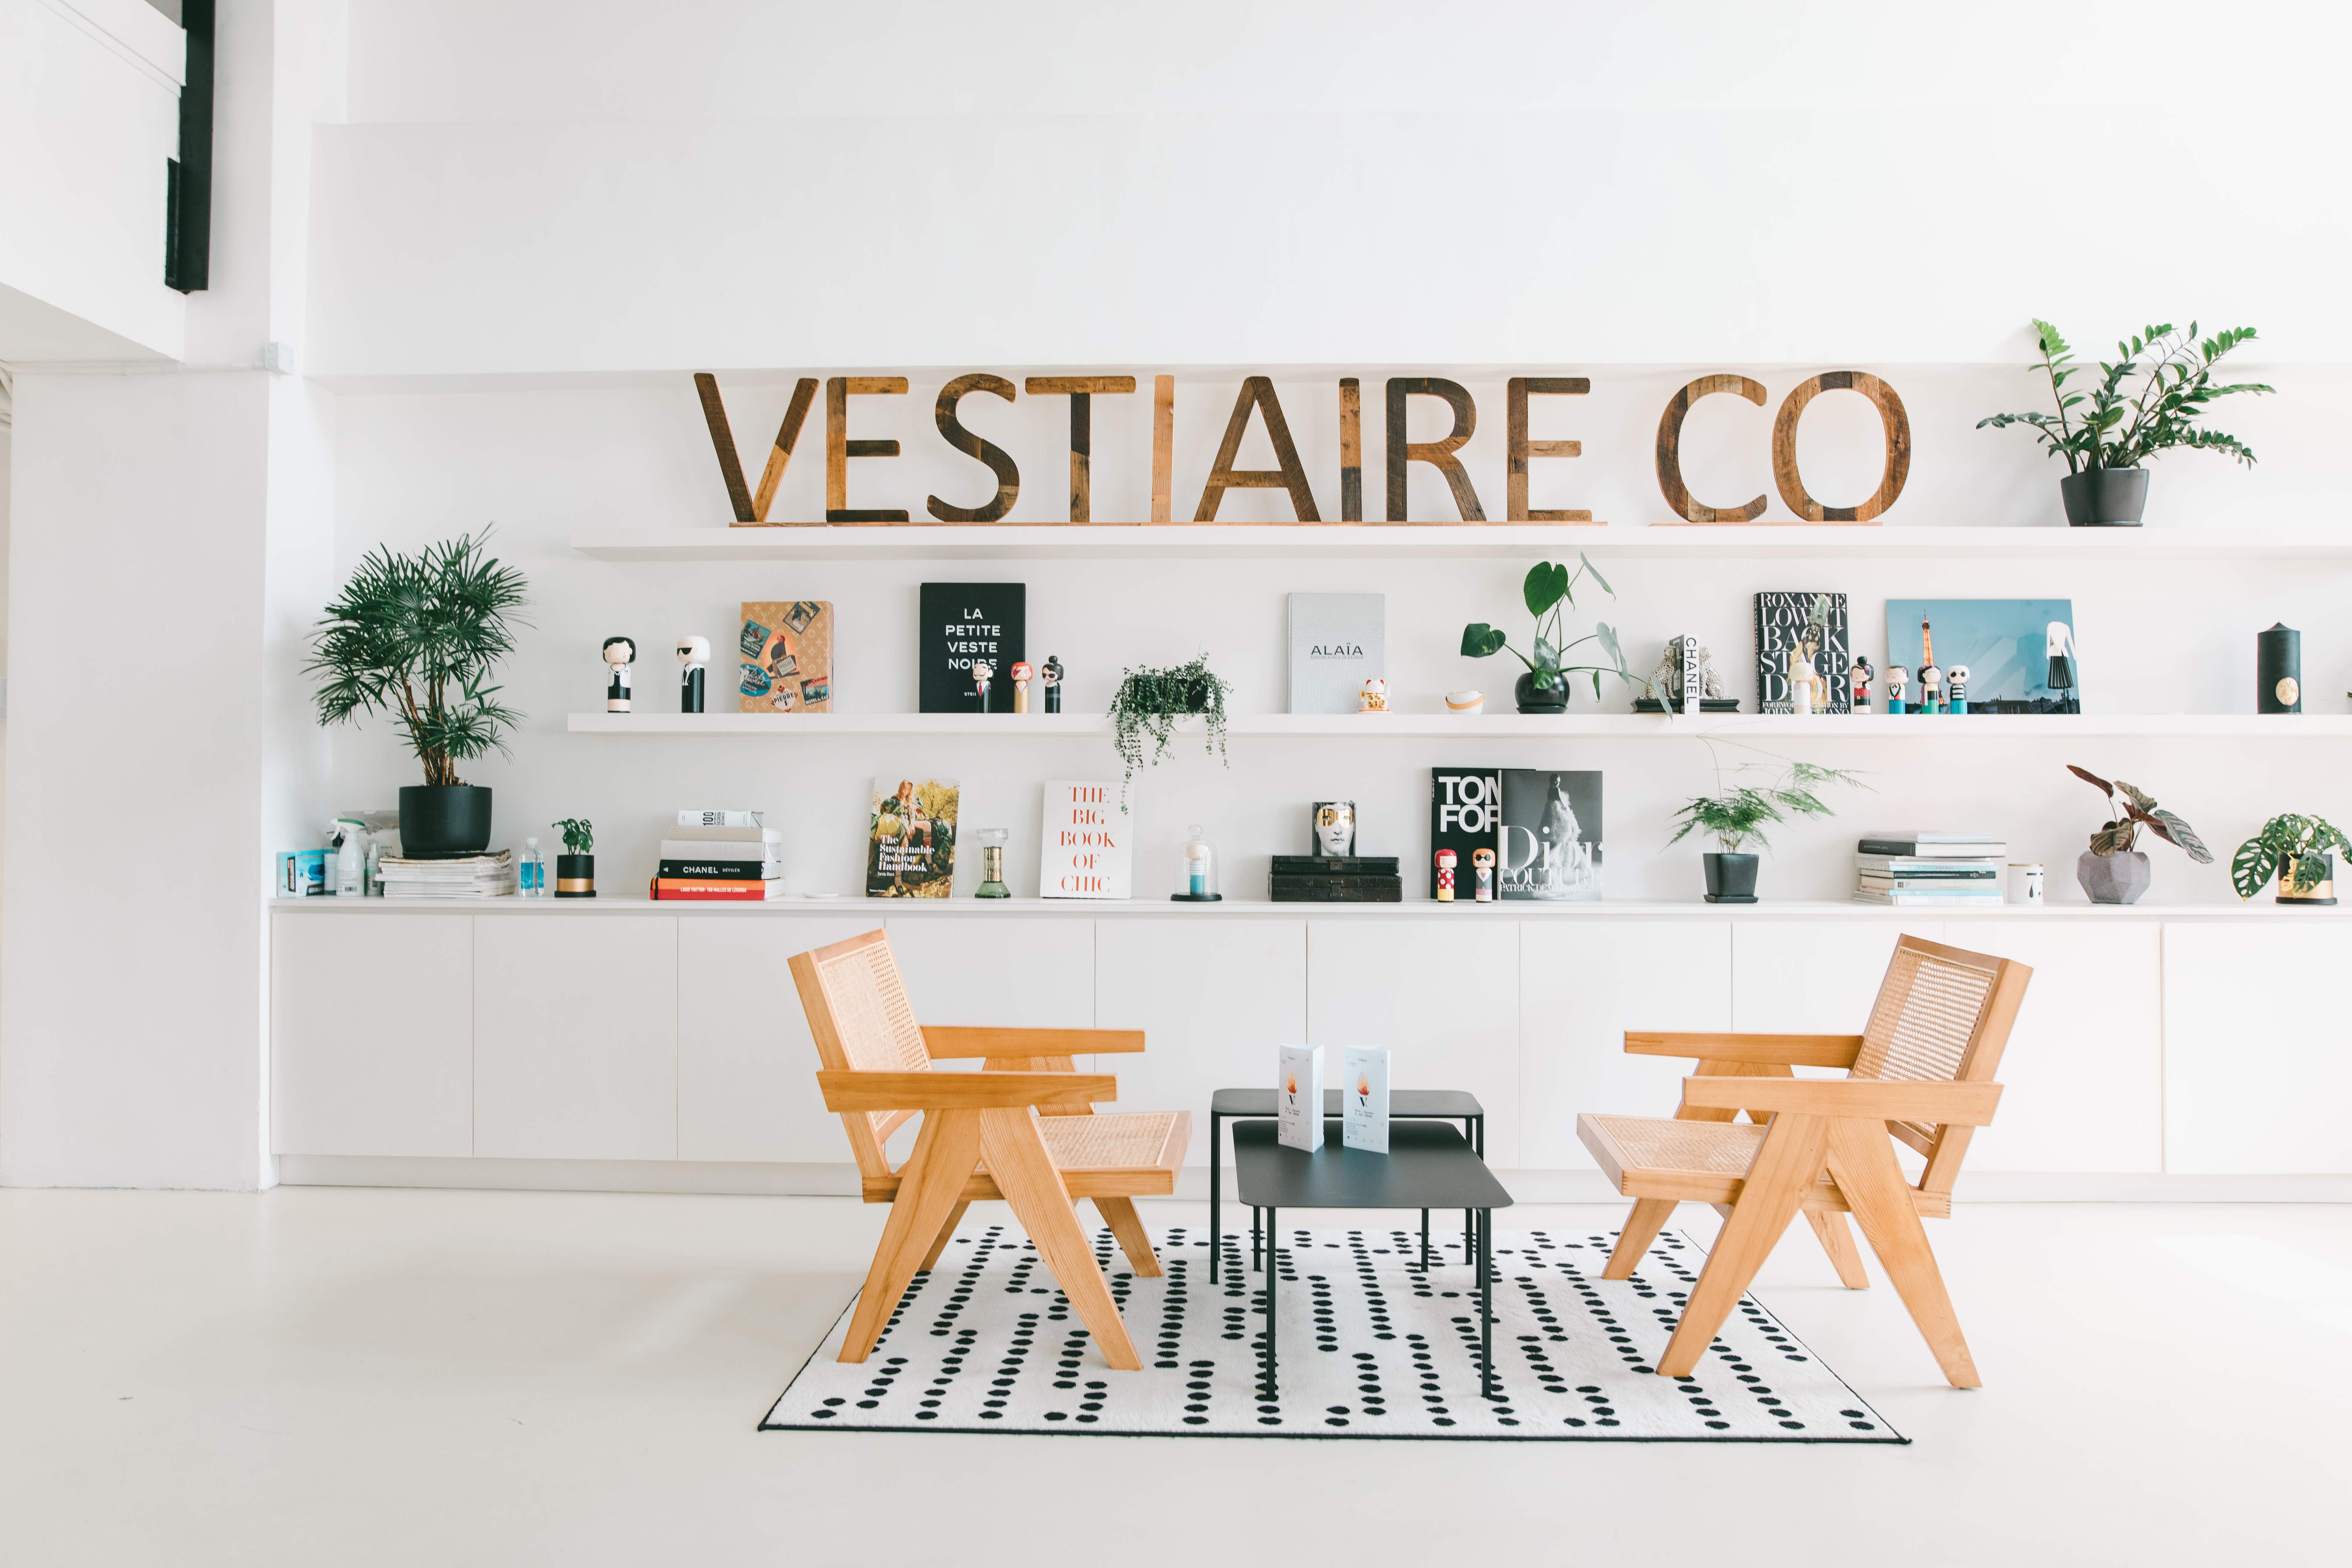 Case Study: Igniting a Growth Journey at Vestiaire Collective